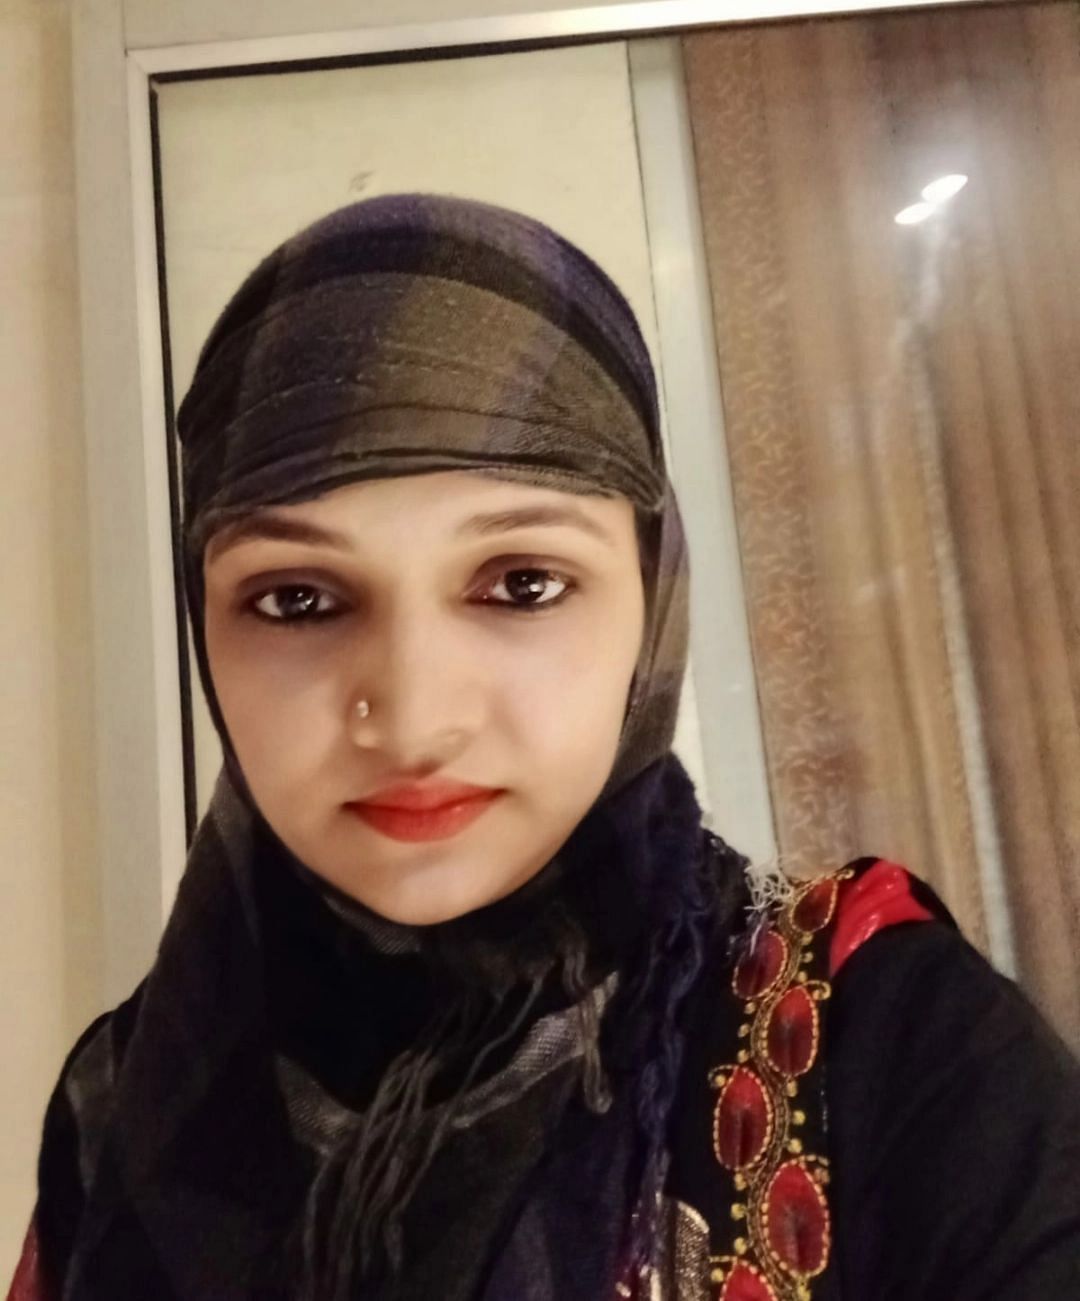 "Everyone asked me why I was going against Islam," said Jannat, the first woman to file the triple talaq case.